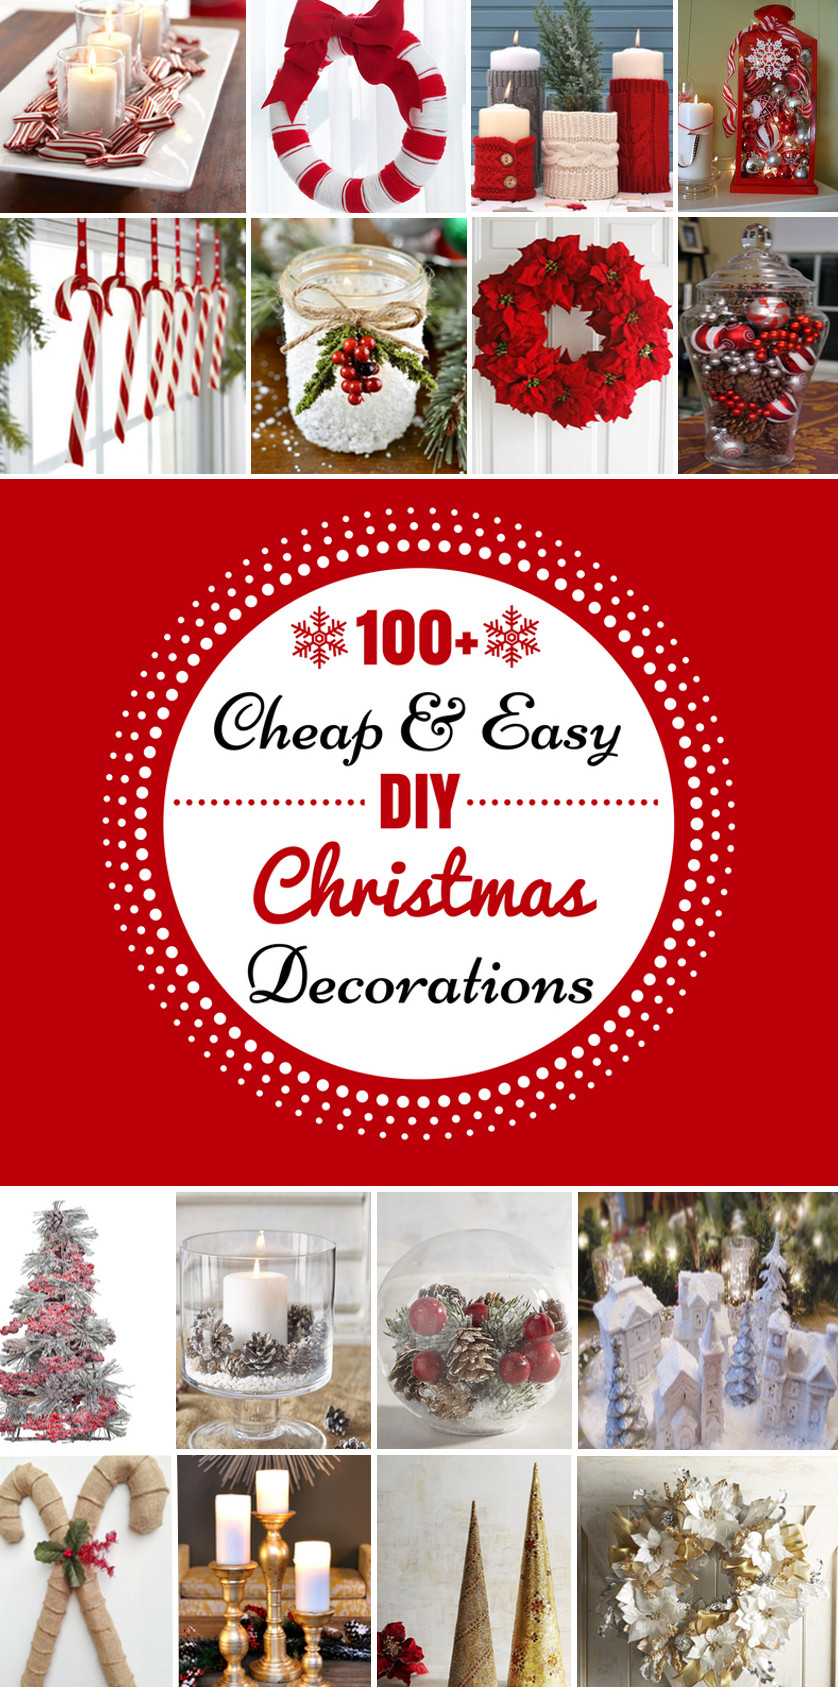 Easy DIY Christmas Decorations
 100 Cheap & Easy DIY Christmas Decorations Prudent Penny